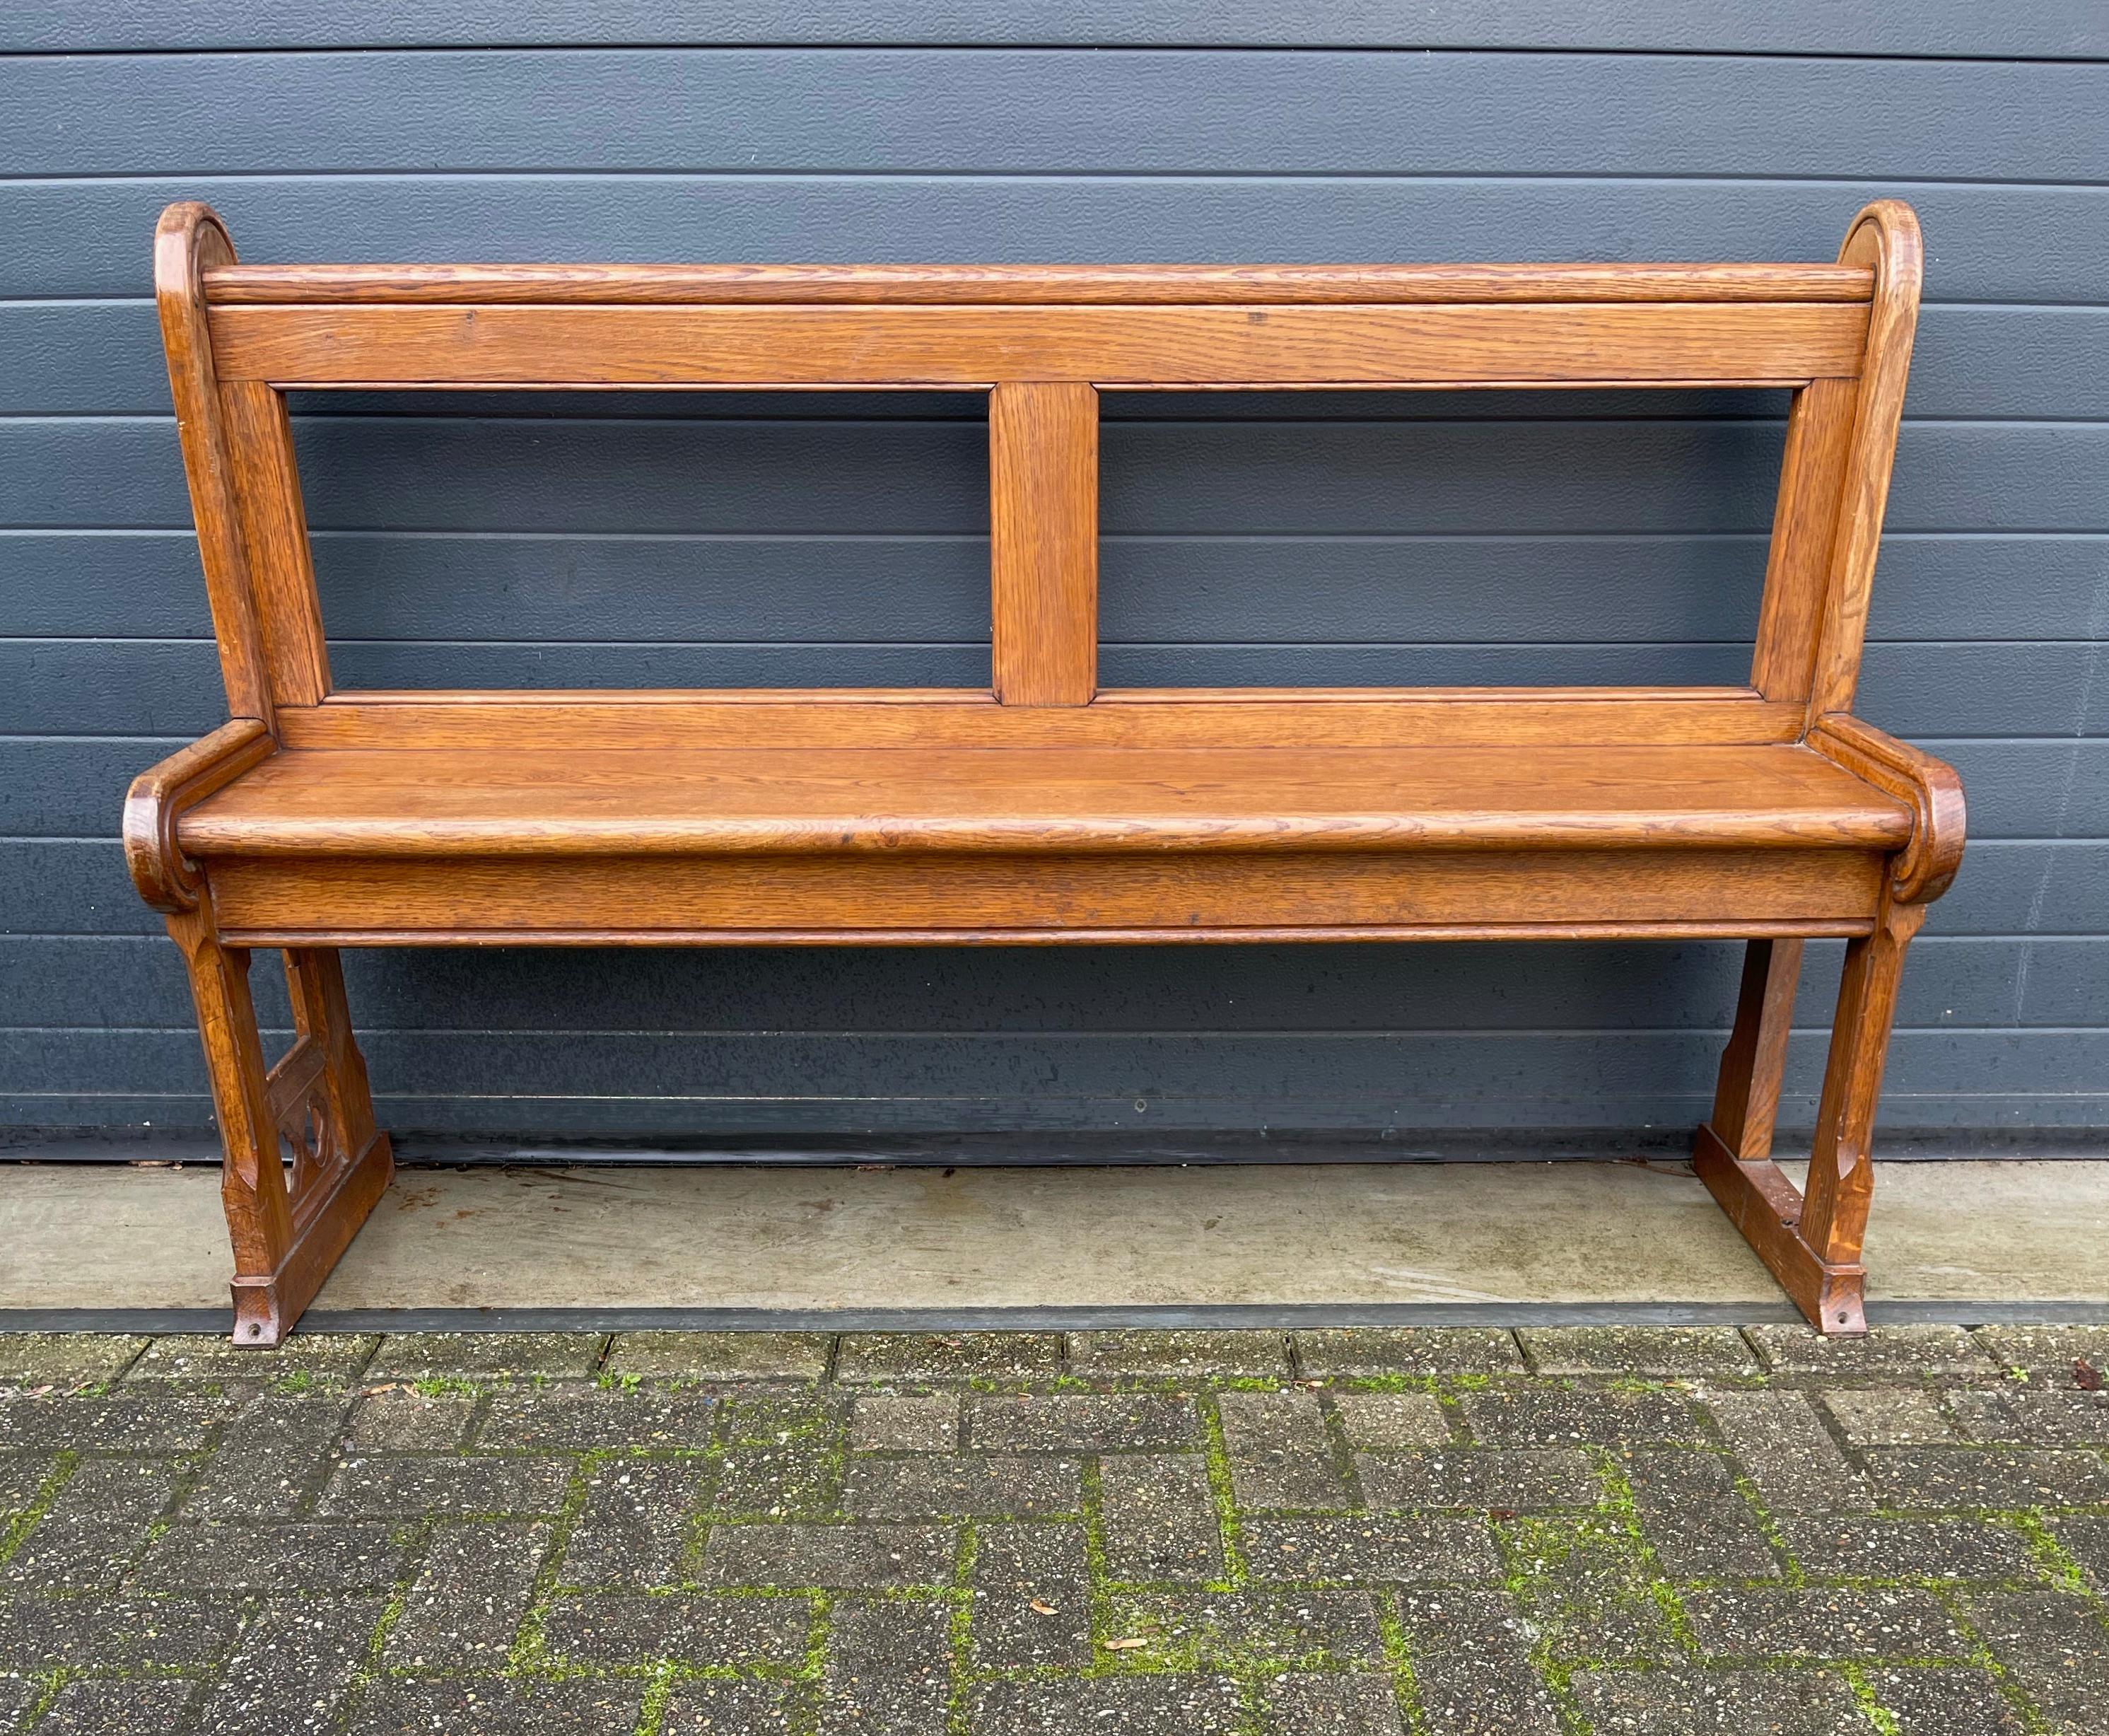 Perfect size and shape church bench.

This very well crafted, solid oak bench is a perfect example of quality made European furniture from the late 1900's. We felt very fortunate to have been given first chance to acquire it and are proud to be able